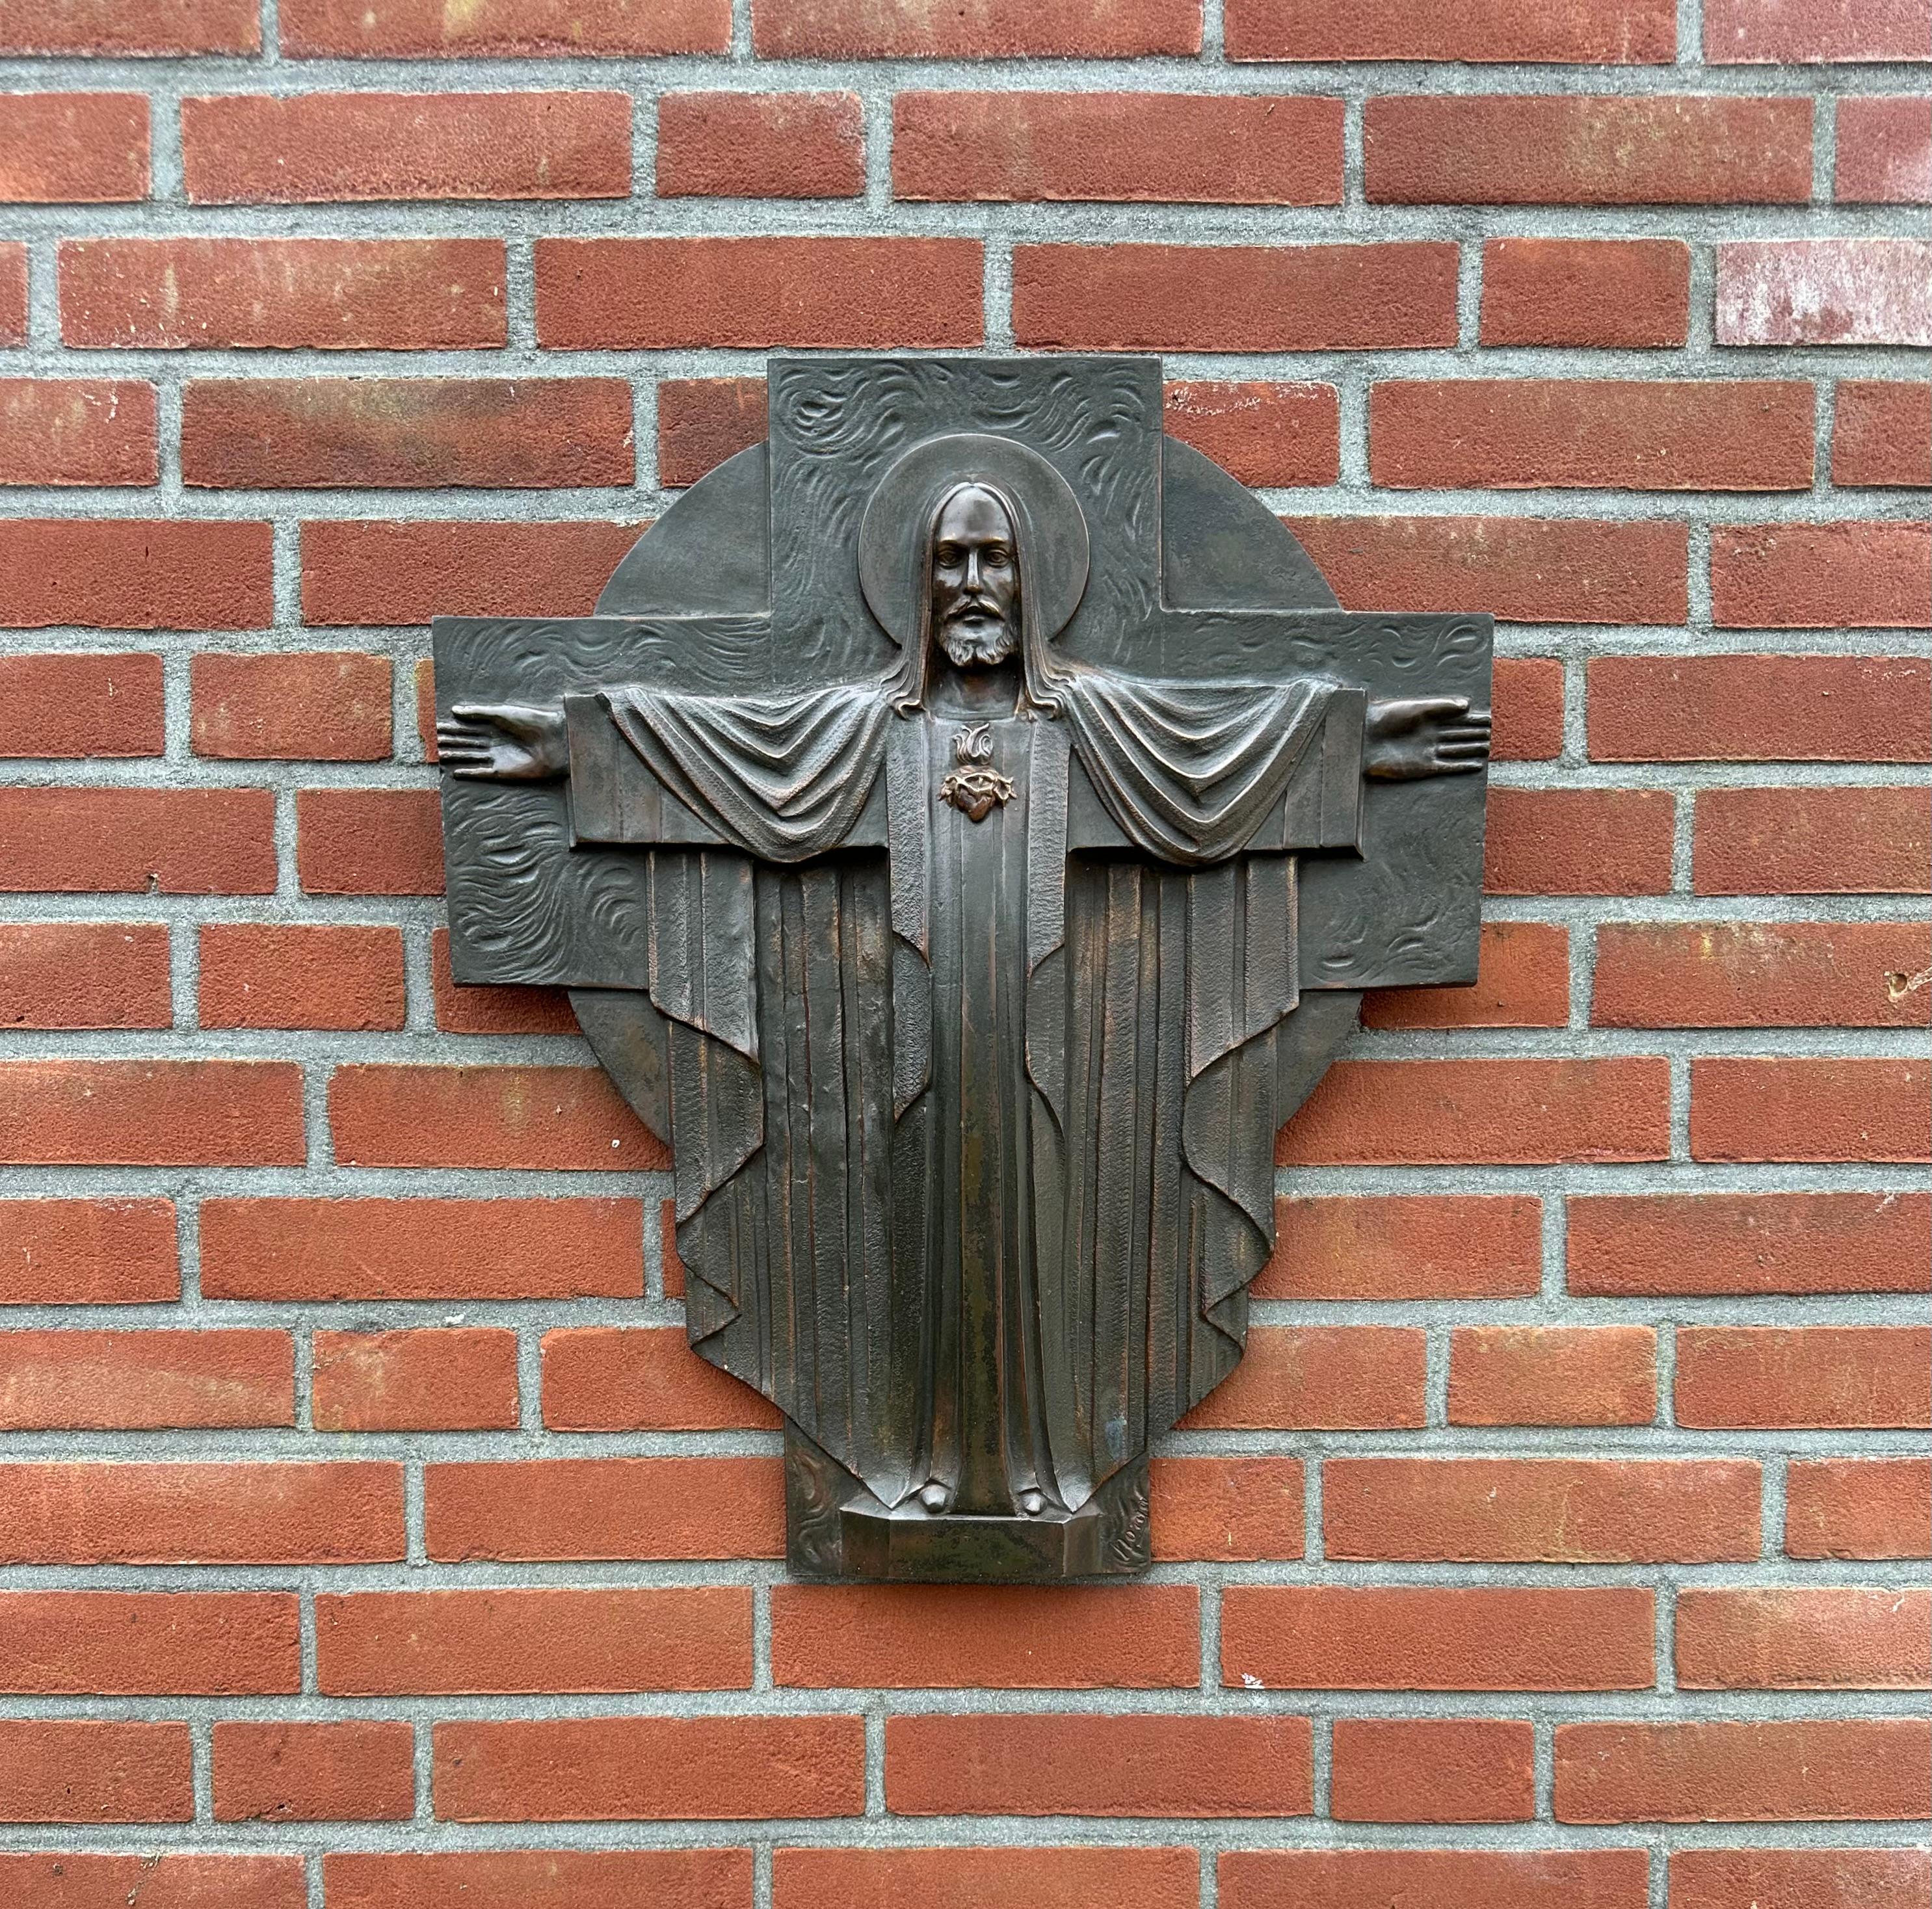 Rare and beautiful bronze Art Deco Christ wall sculpture.

Some works of religious art depict Christ in terrible agony, but this symmetrical specimen from the European Art Deco era is ofcourse a Holy Heart in a cross-like manner and here Jezus